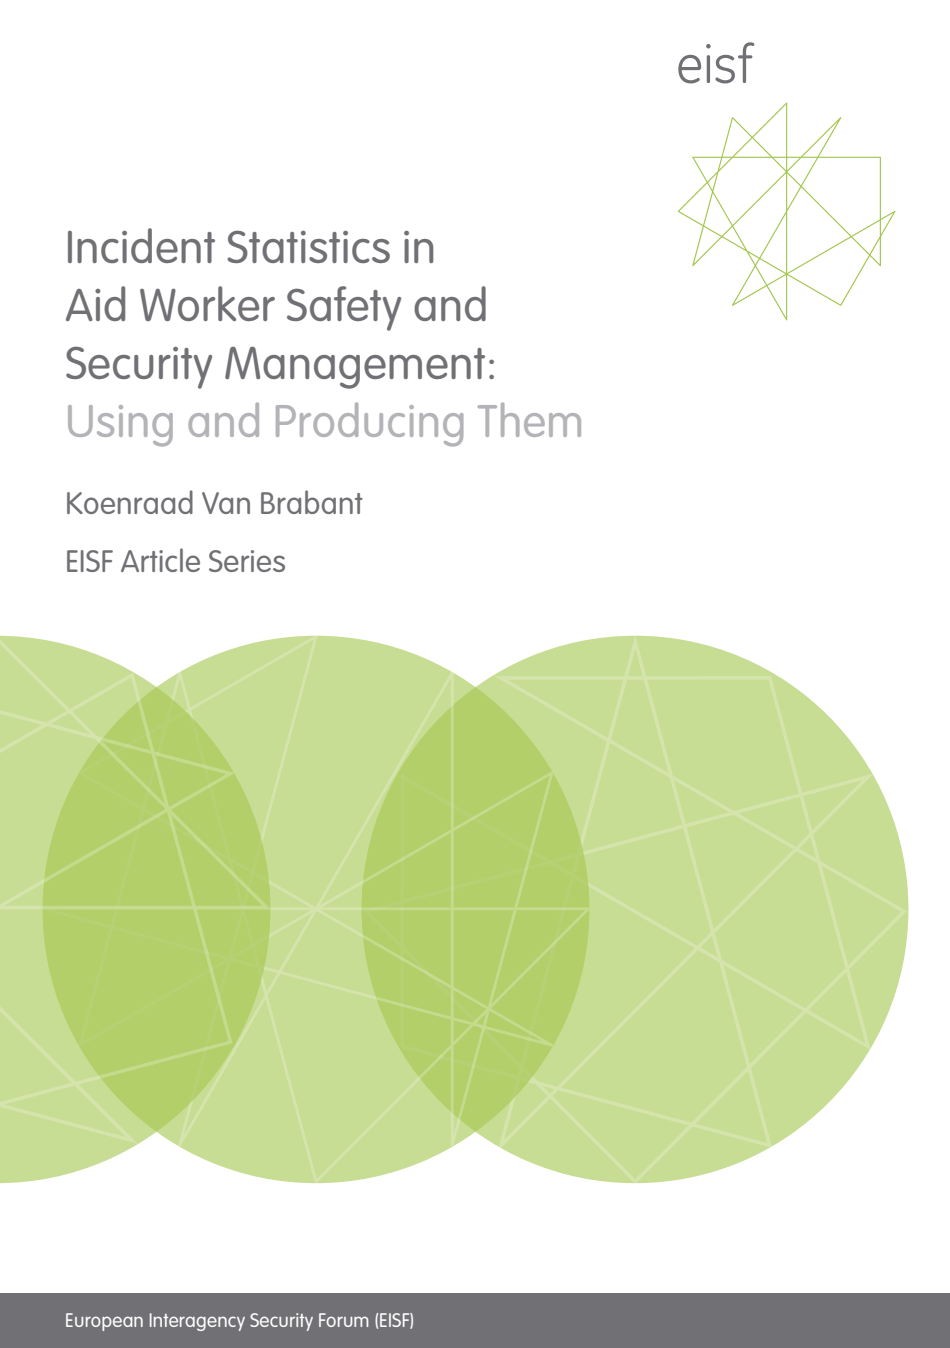 Incident Statistics in Aid Worker Safety and Security Management